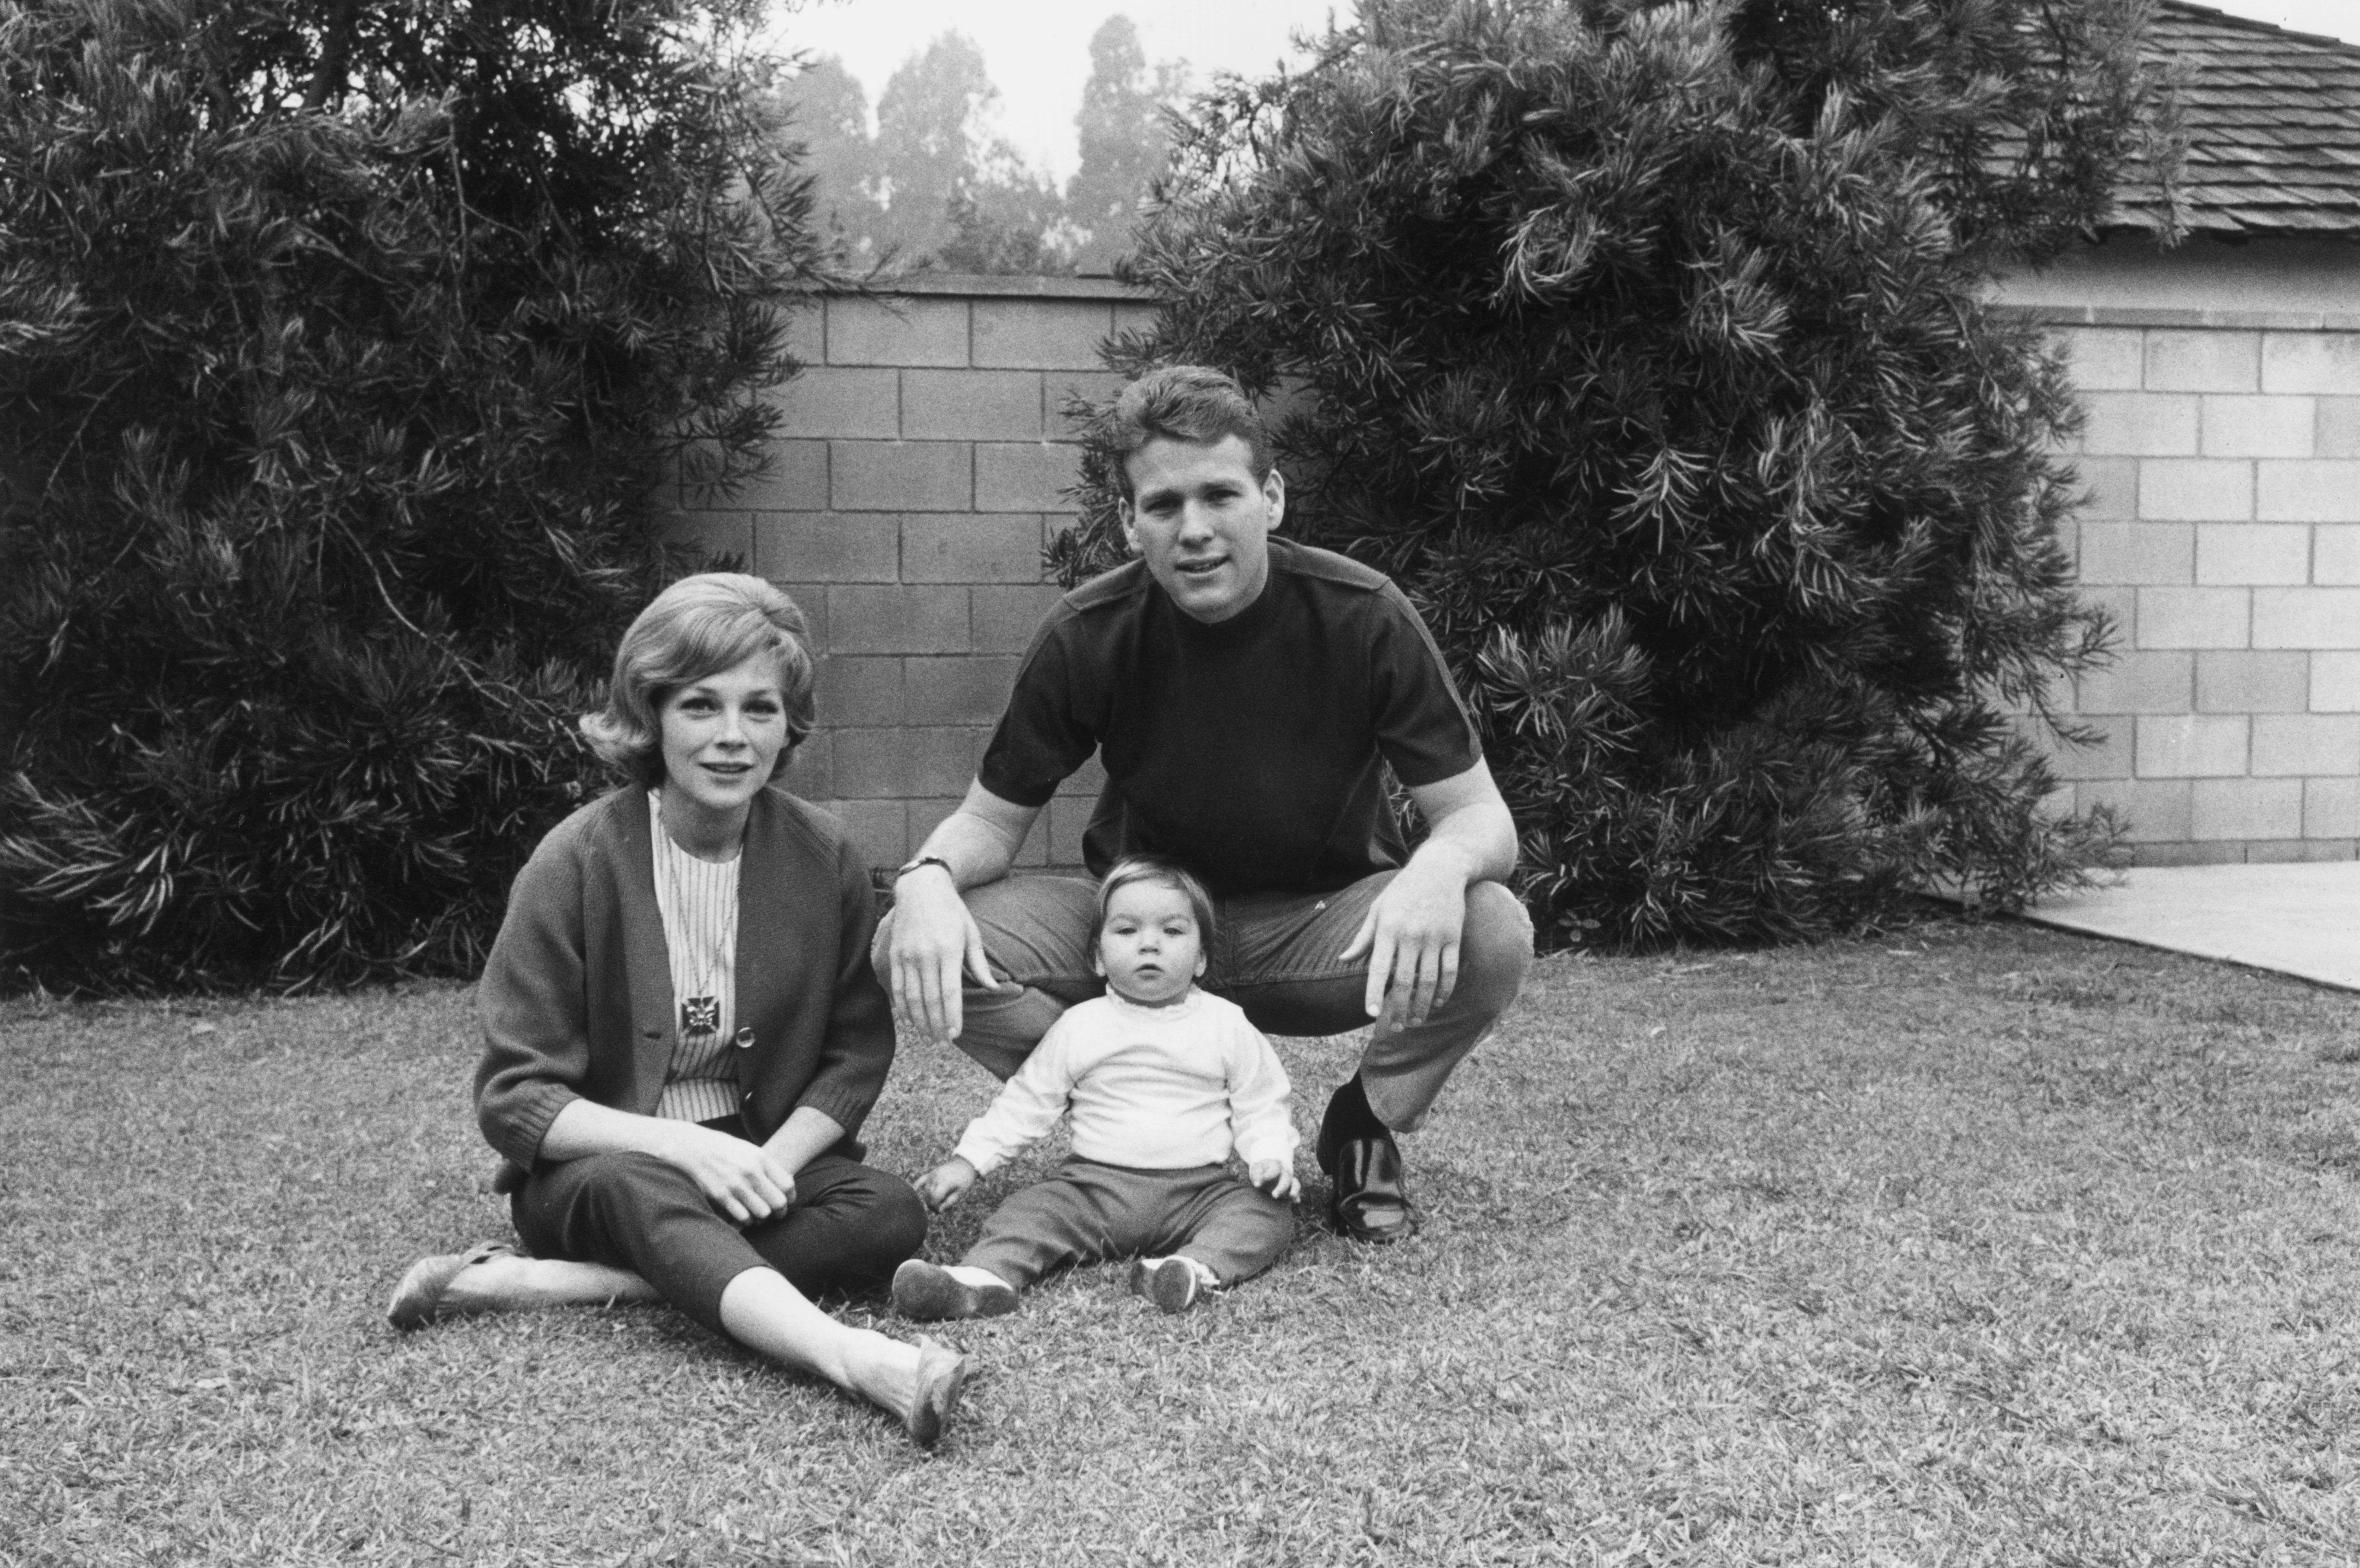 Ryan O'Neal with his wife, actor Joanna Moore, and daughter, Tatum, sitting on grass in front of a stone wall | Photo: Getty Images